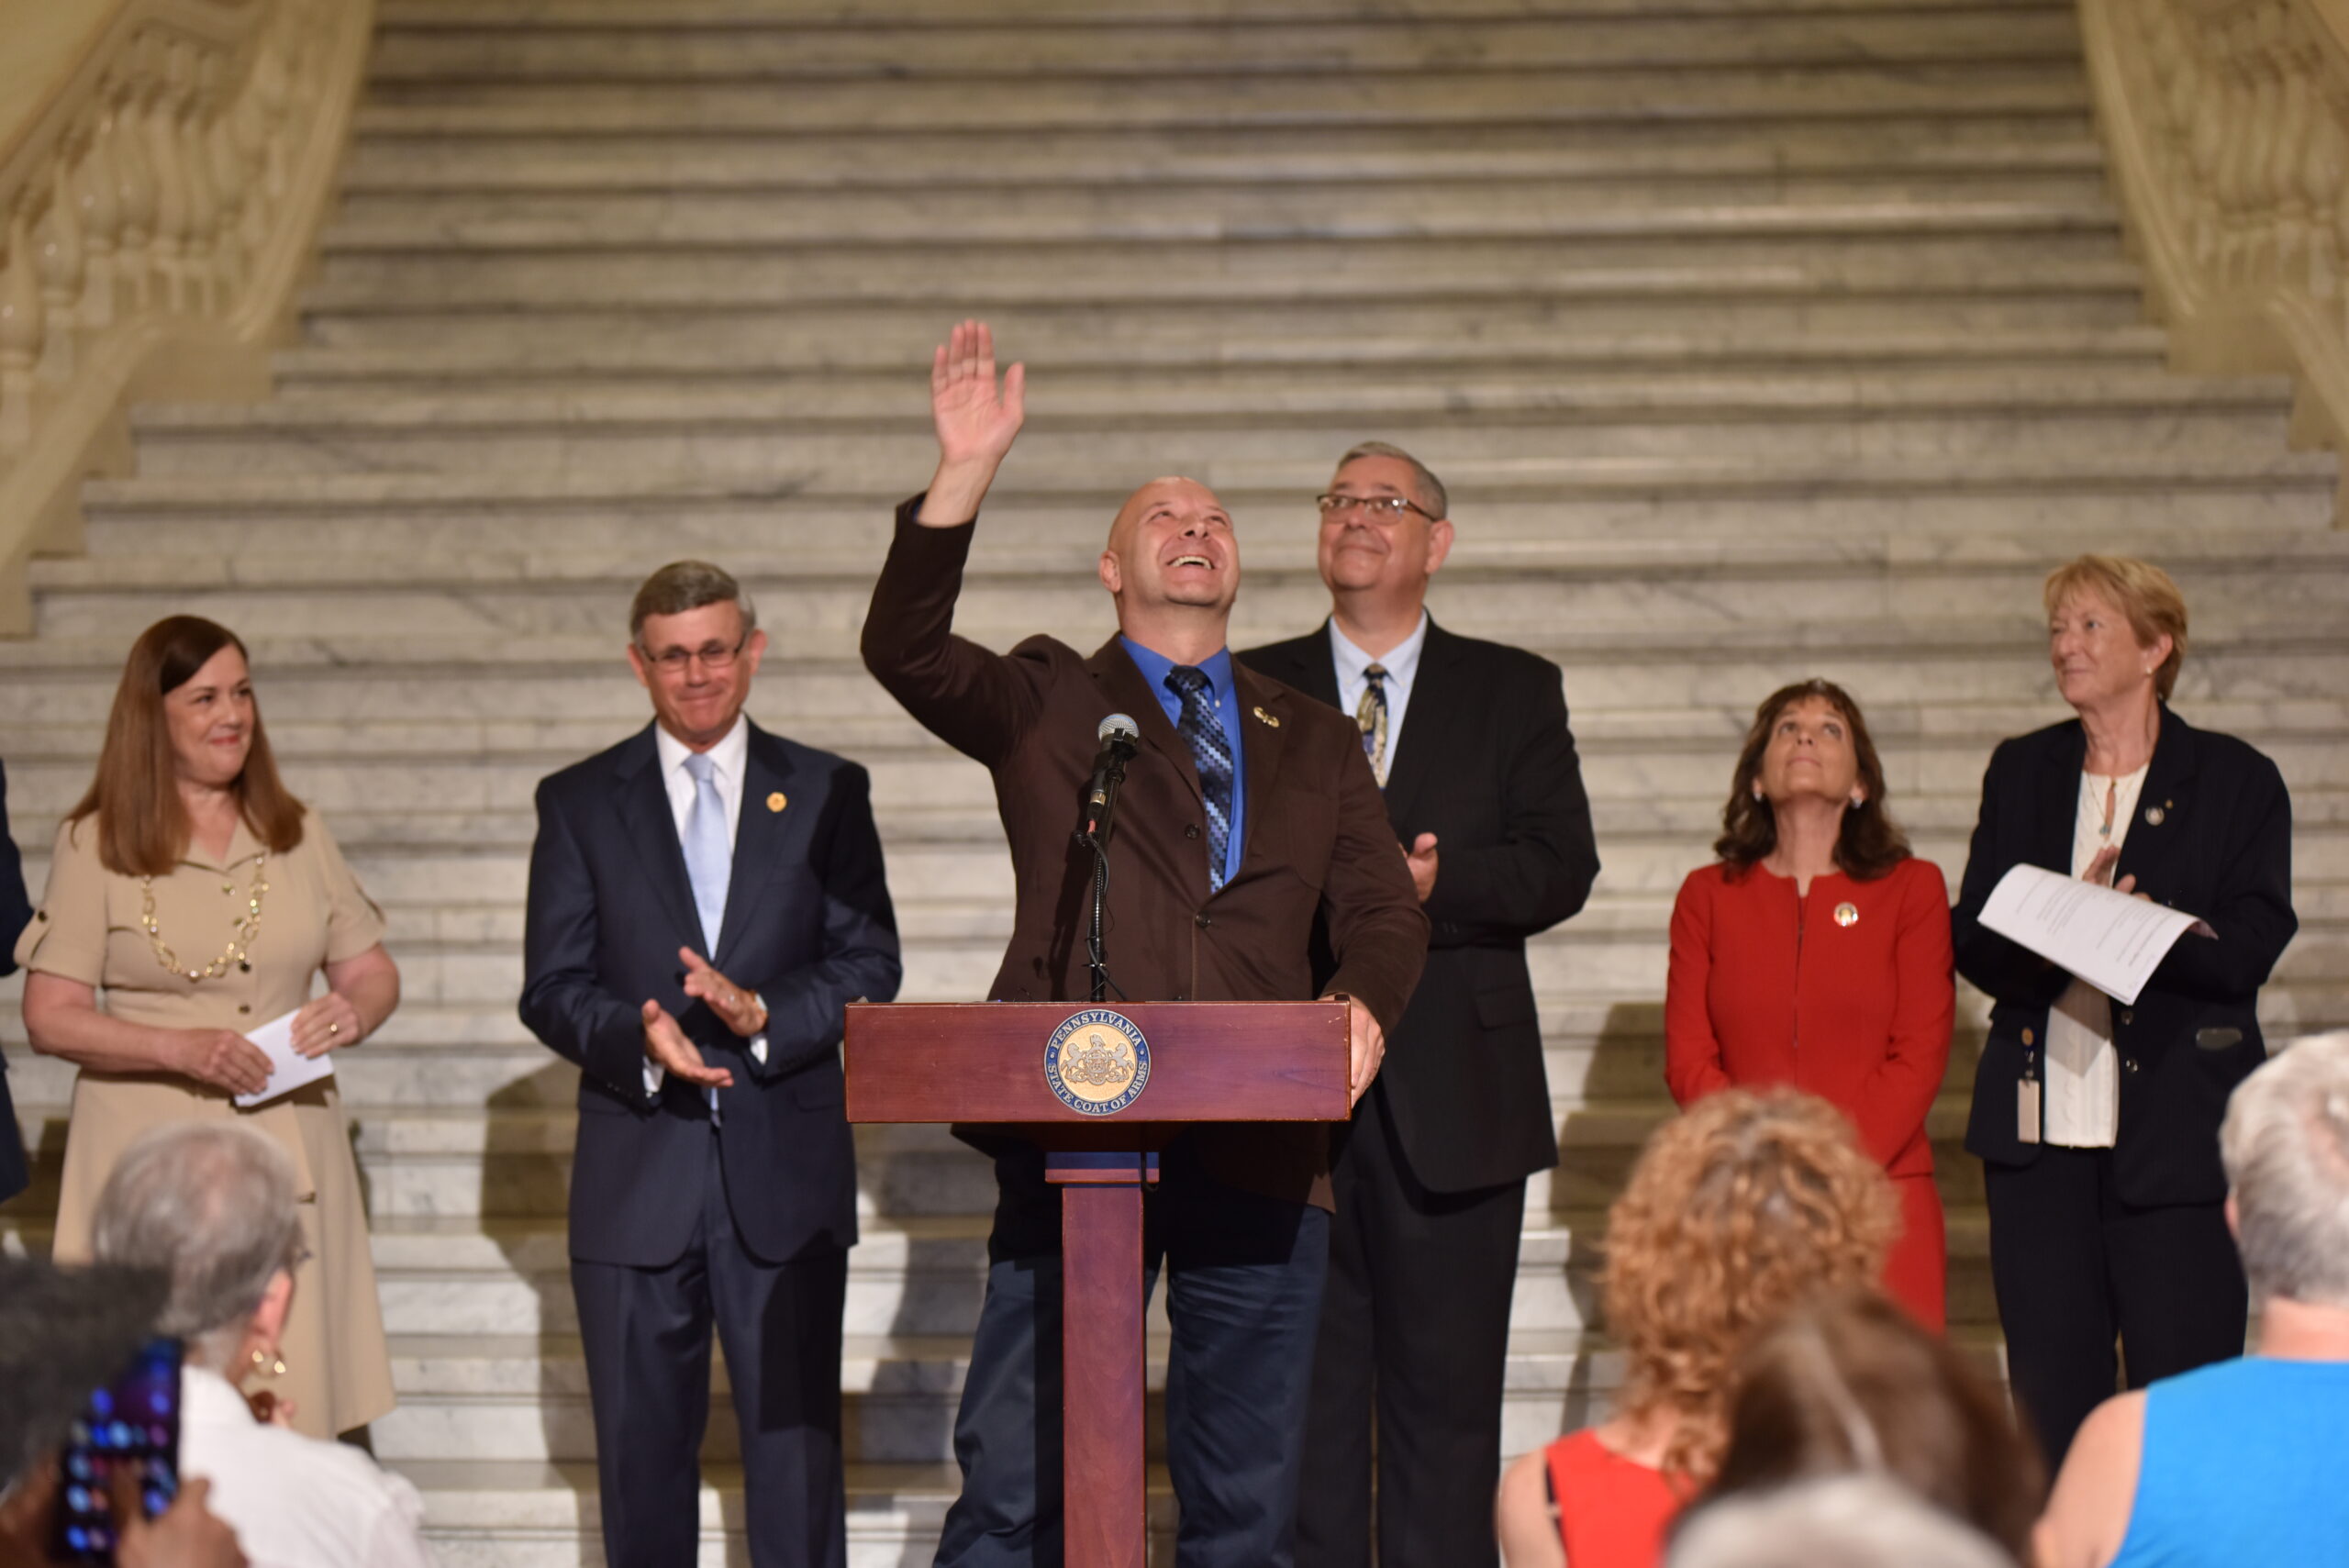 Doug Mastriano and some Pa. GOP leaders think Christianity and government should be linked